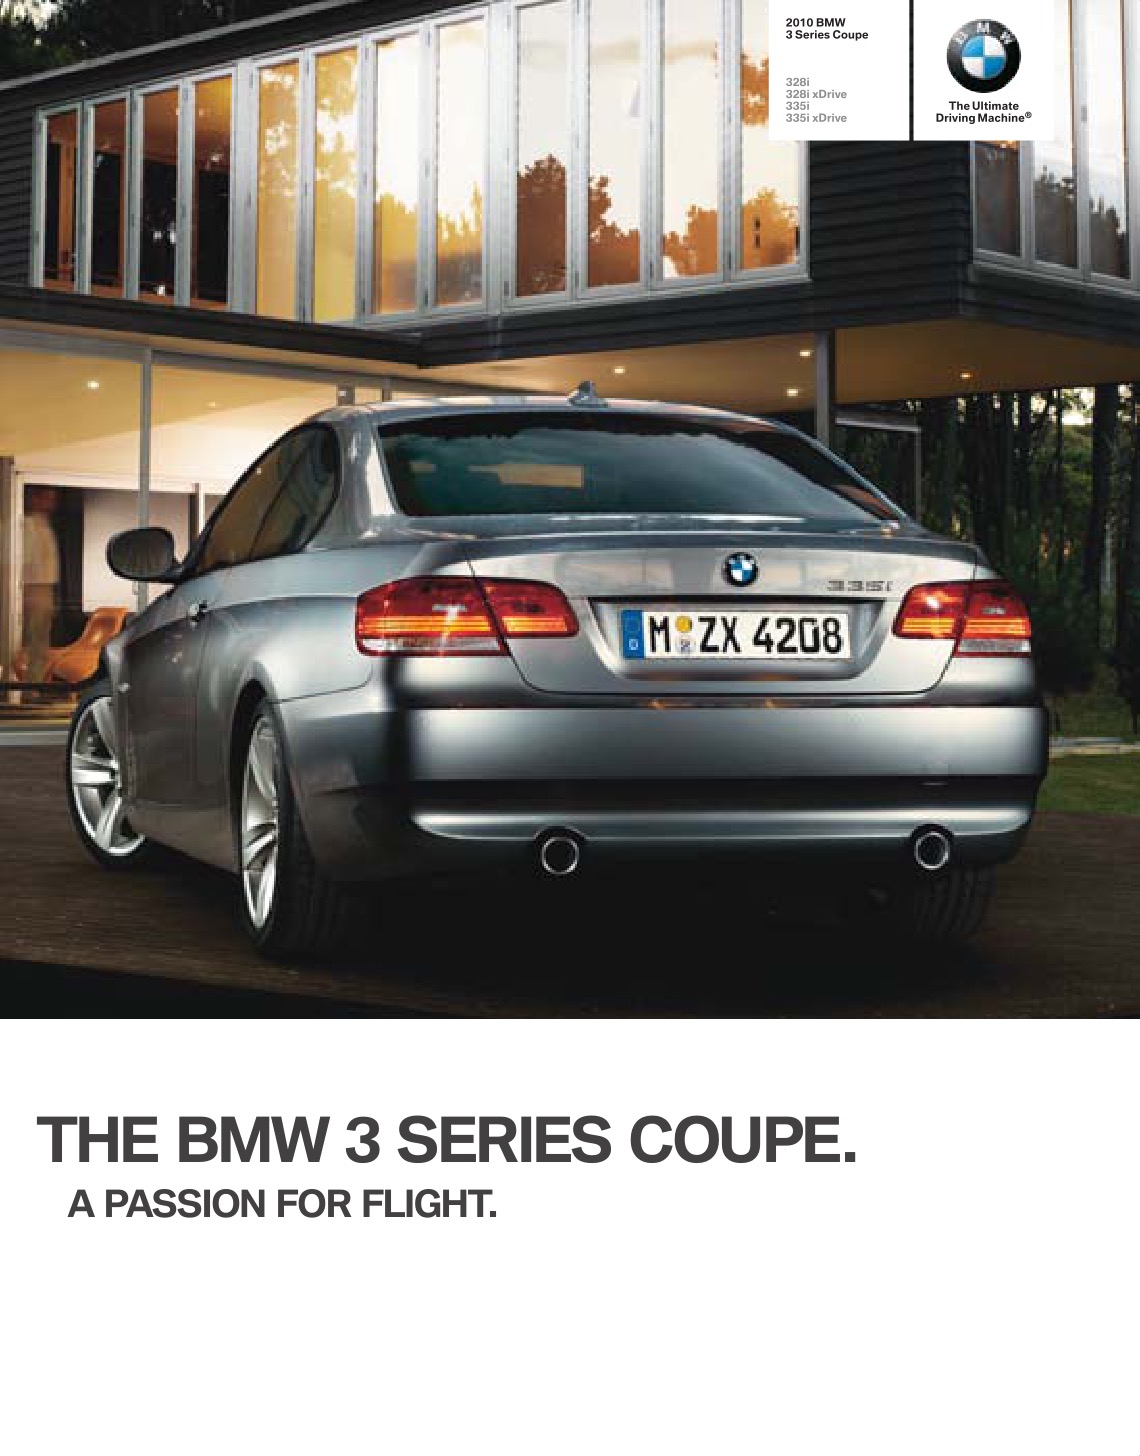 2010 BMW 3-Series Coupe Brochure